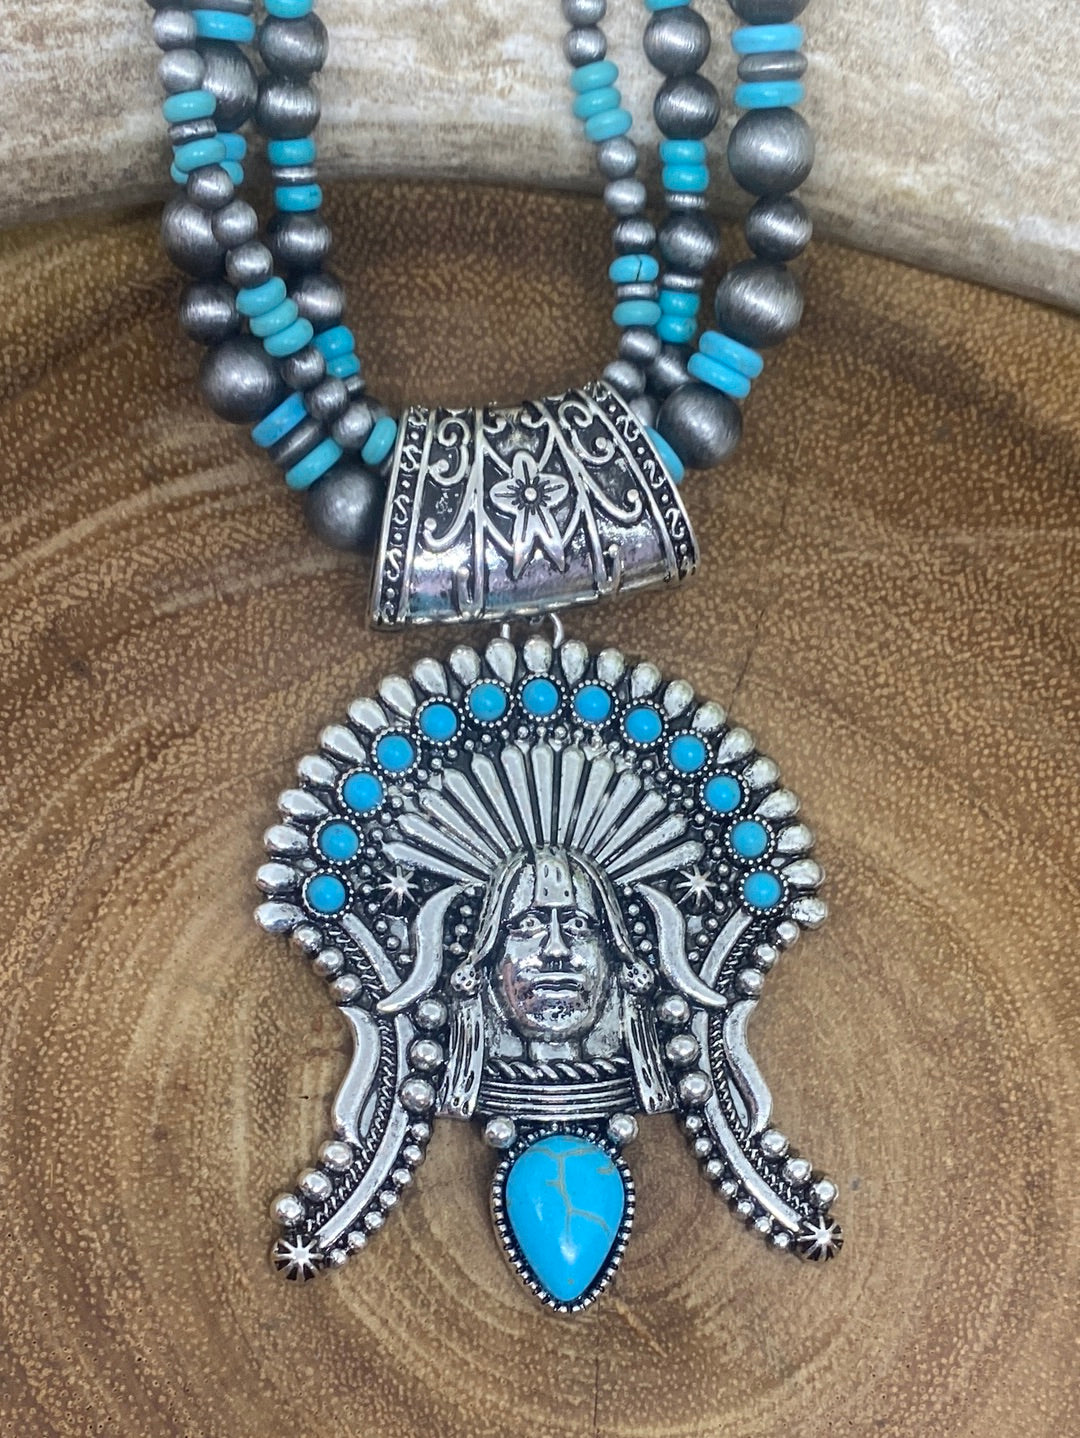 native american turquoise necklace | eBay